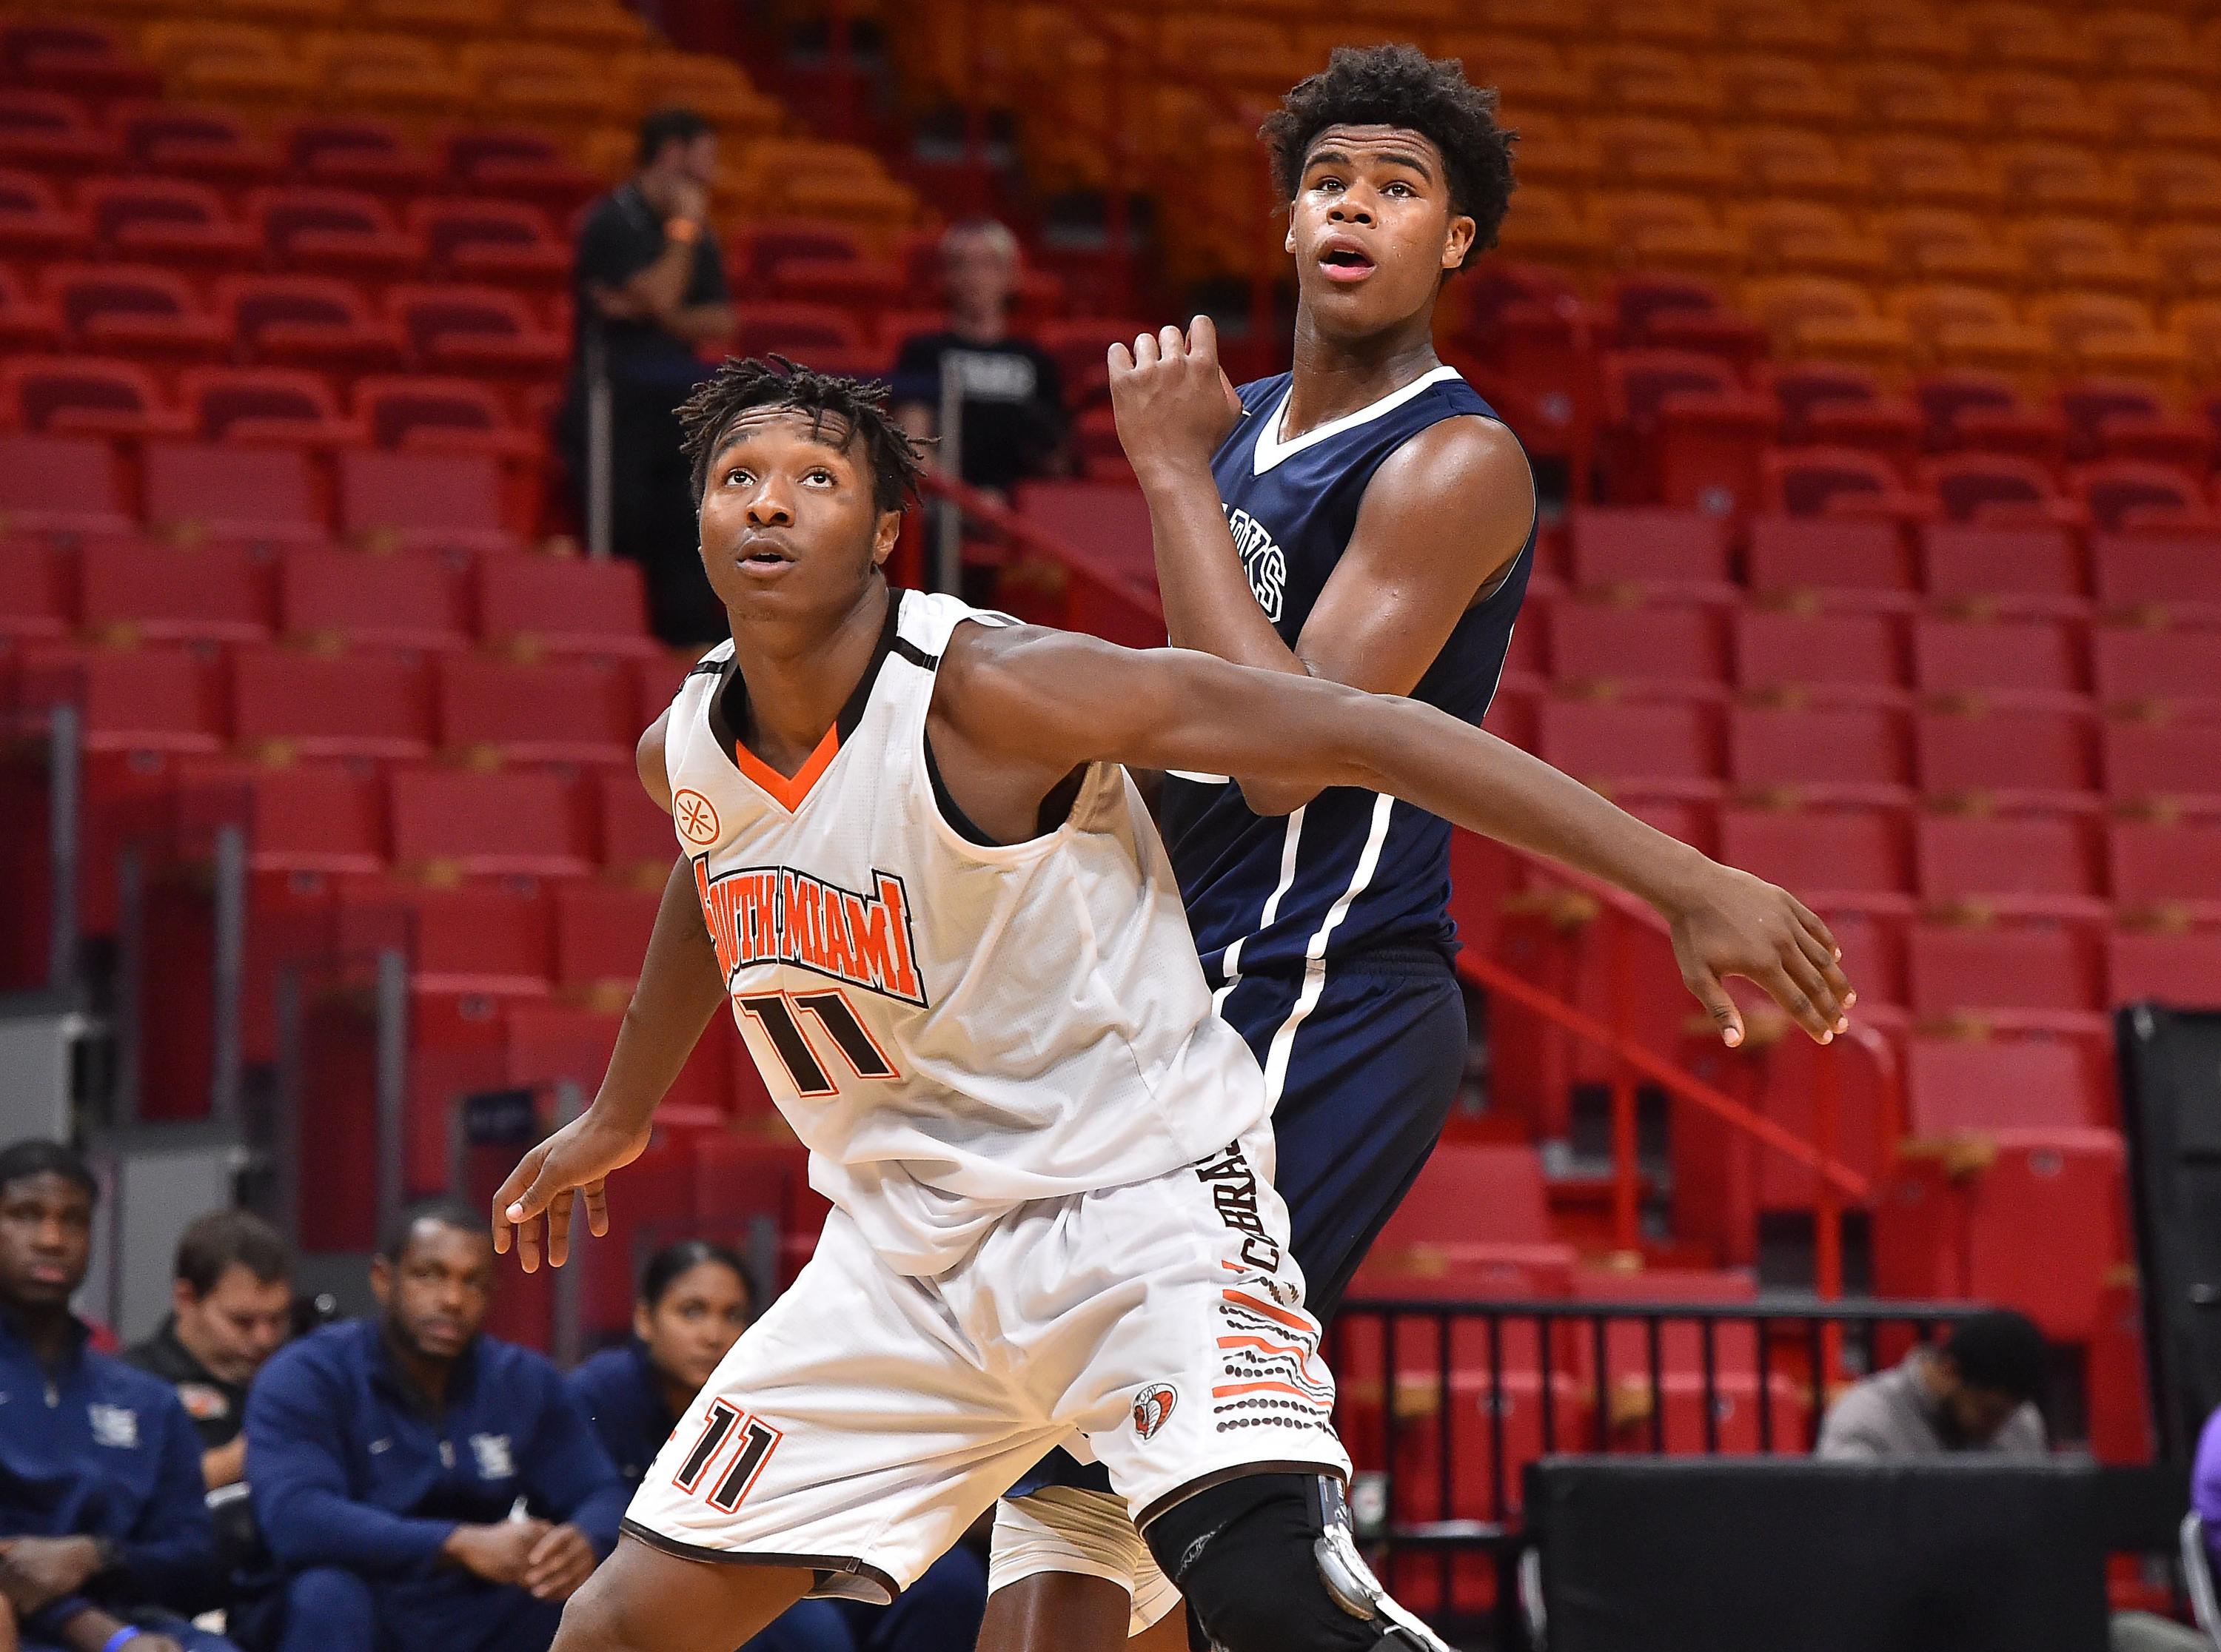 12/8/16 9:57:37 PM -- Miami, FL, U.S.A -- South Miami gaurd Latravian Glover (11) and University School forward Vernon Carey Jr (22) battle for position on the court during the second half of the HoopHall Miami Invitational. -- Photo by Jasen Vinlove-USA TODAY Sports Images, Gannett ORG XMIT: US 135835 hoophall 12/8/2016 [Via MerlinFTP Drop]